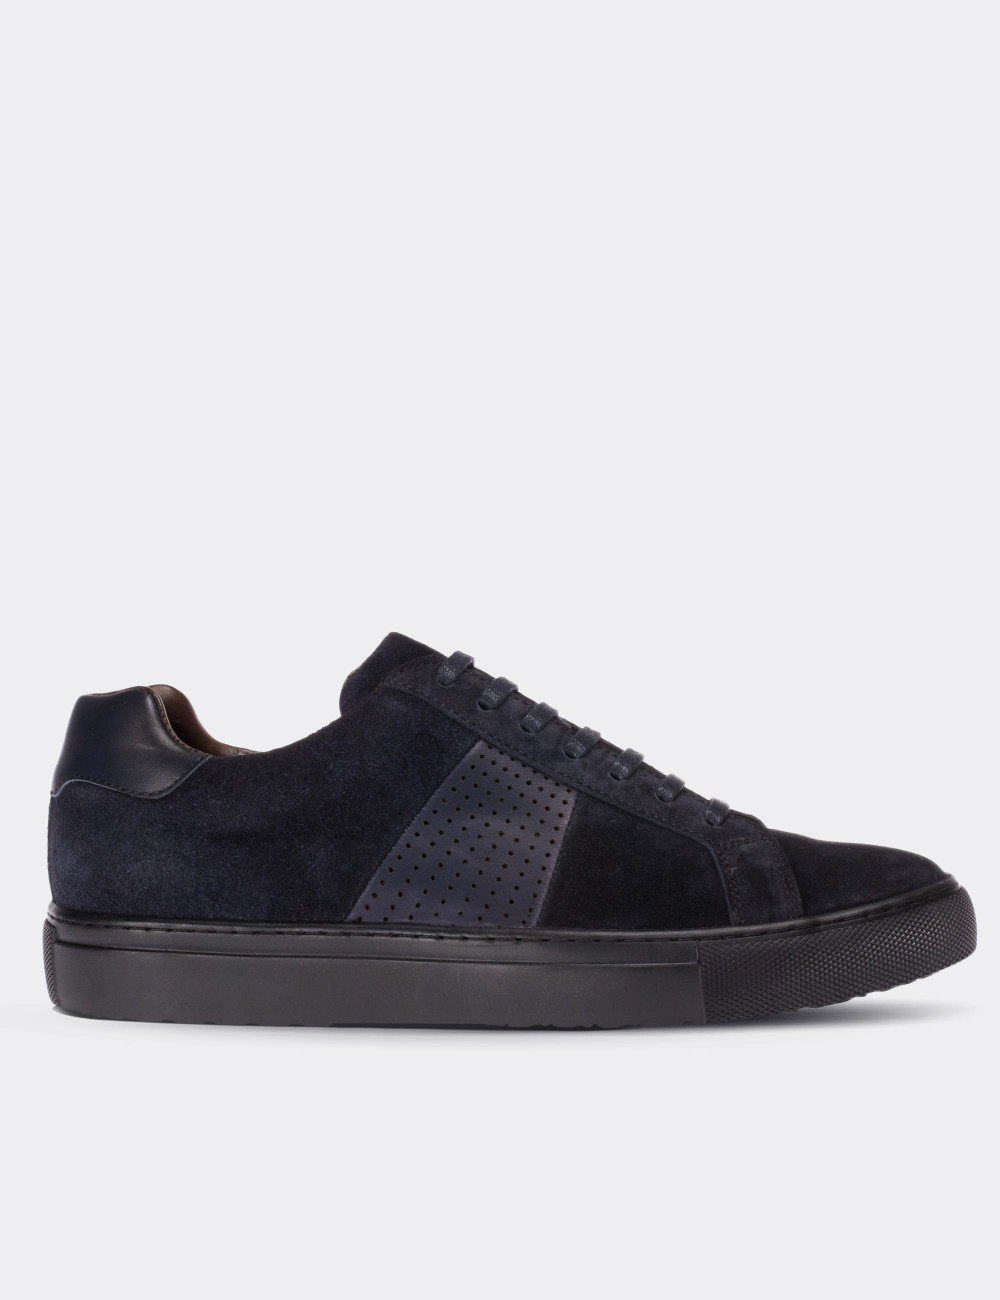 Navy Suede Leather Sneakers - 01740MLCVC01